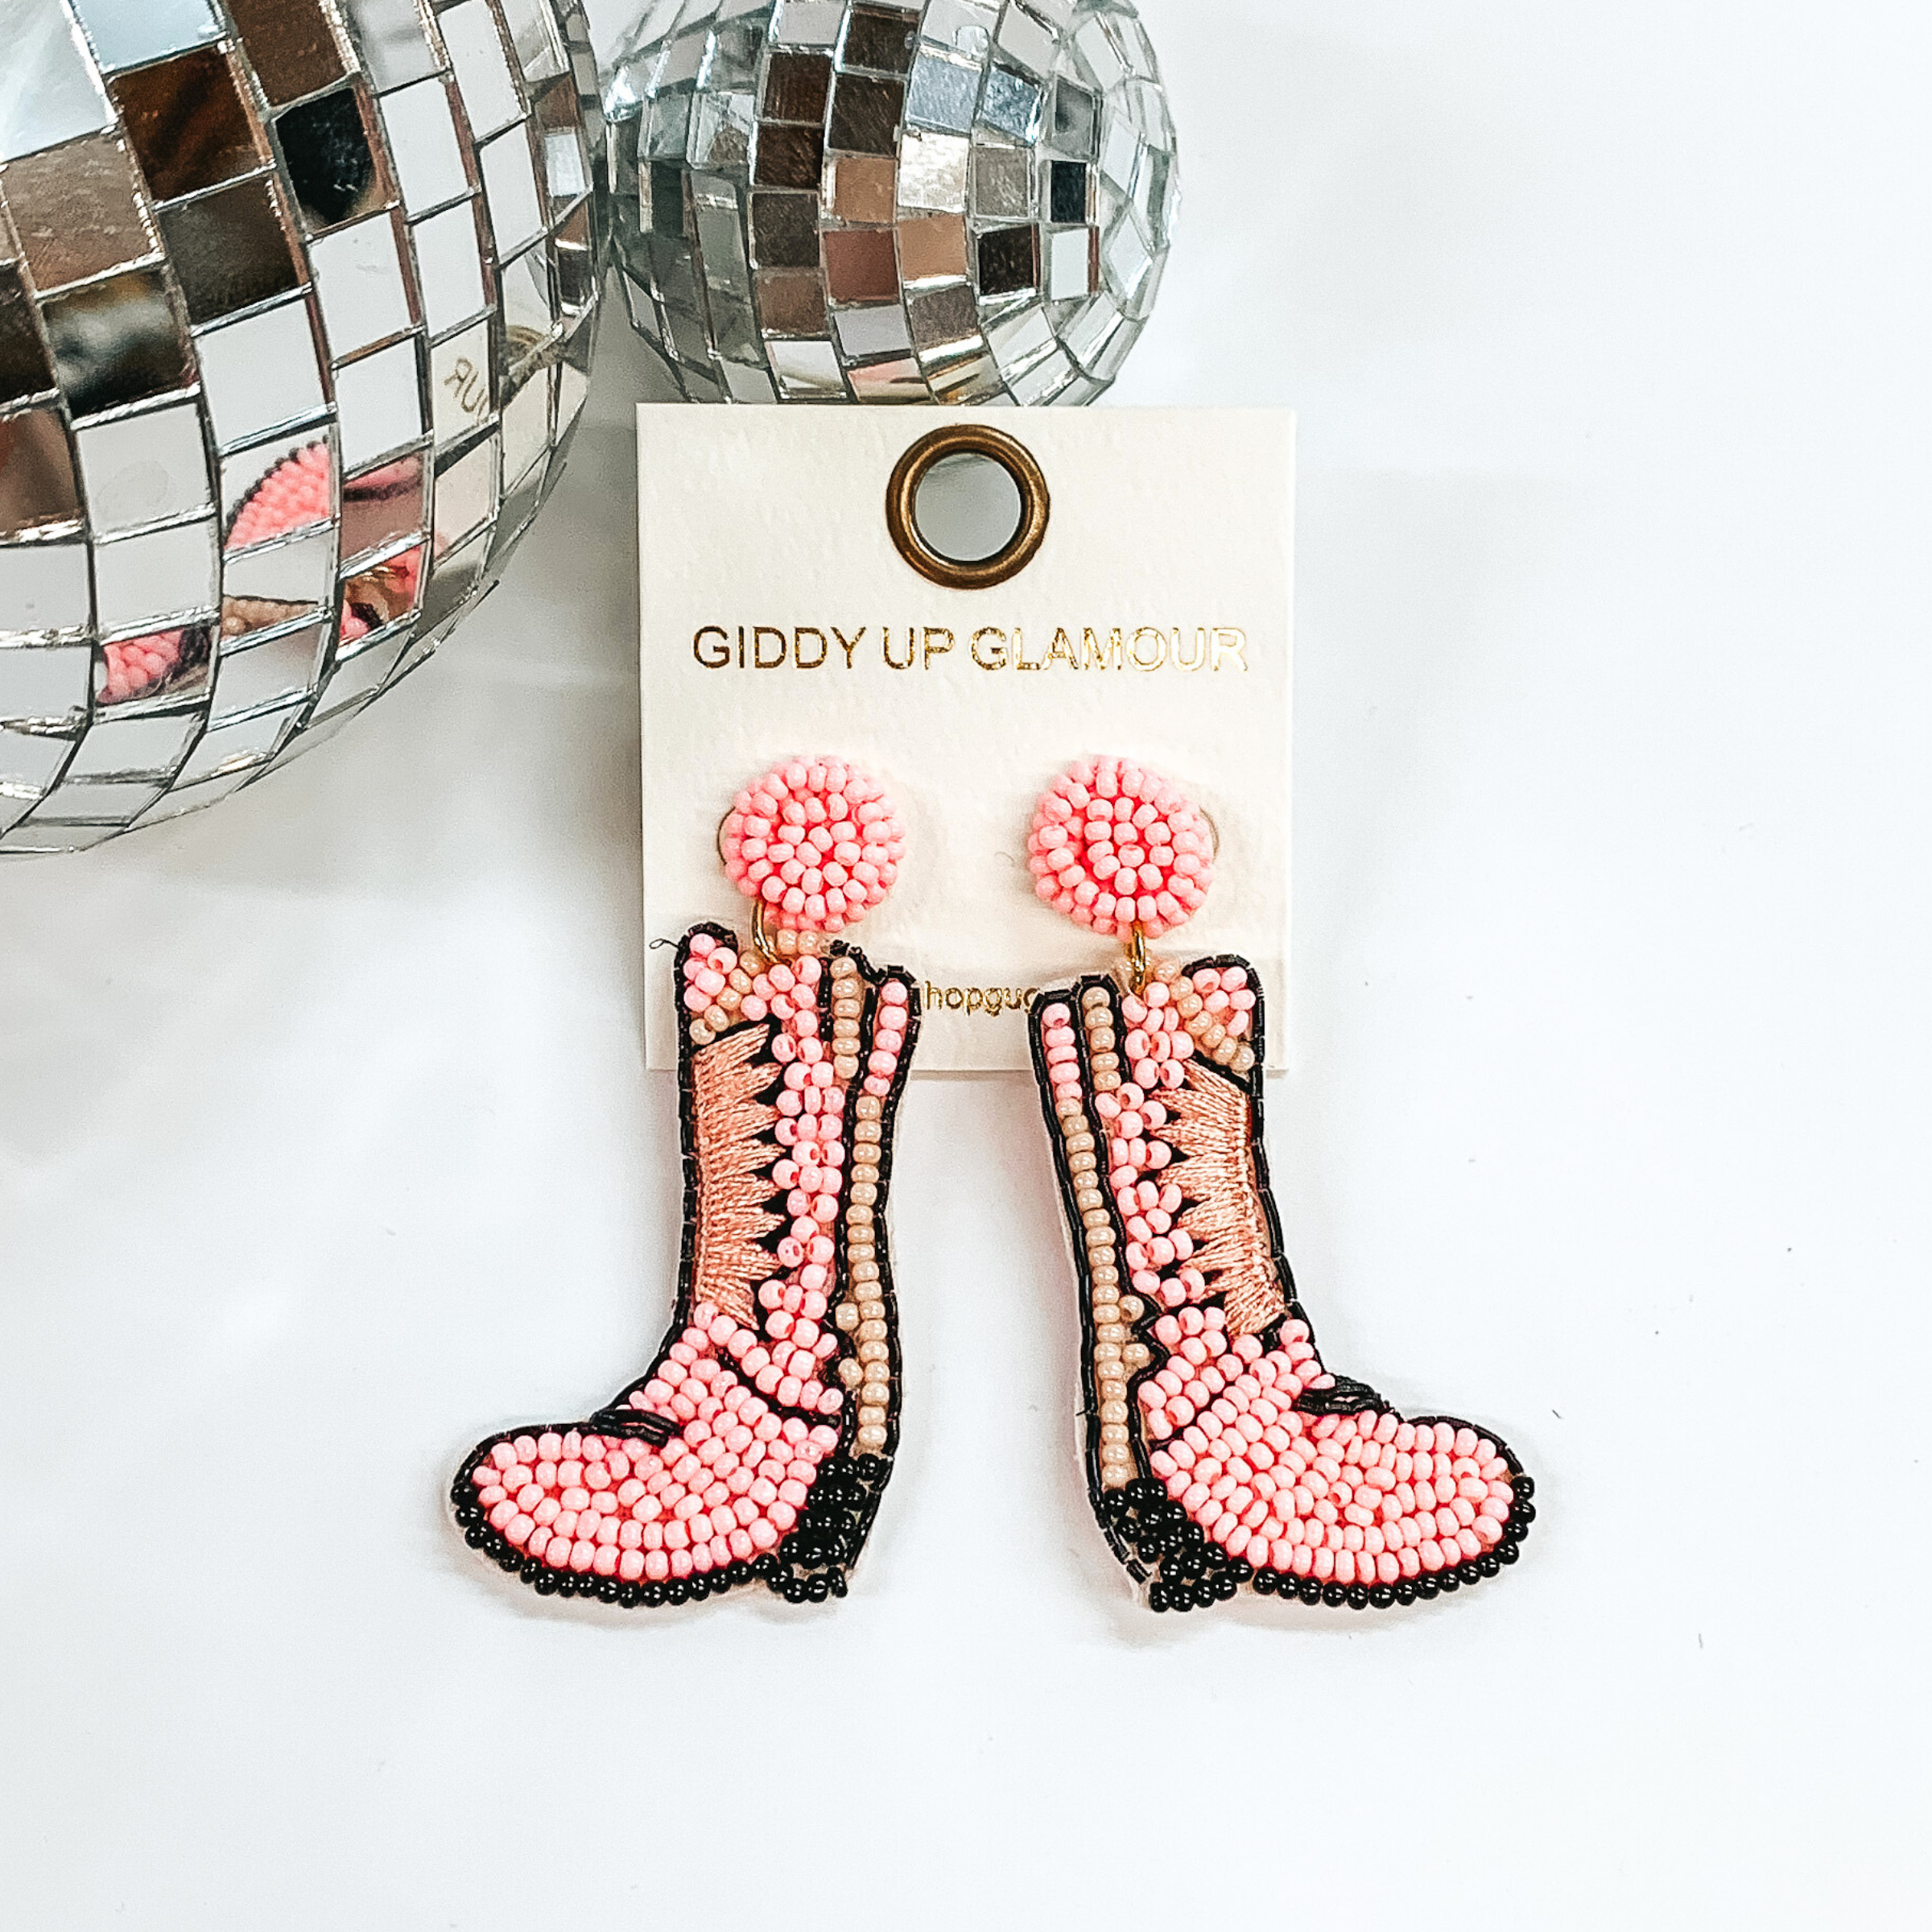 Beaded light pink boot post back earrings. These earrings include black and pink detailing. These earrings are pictured on a white background with disco balls in the top left corner.